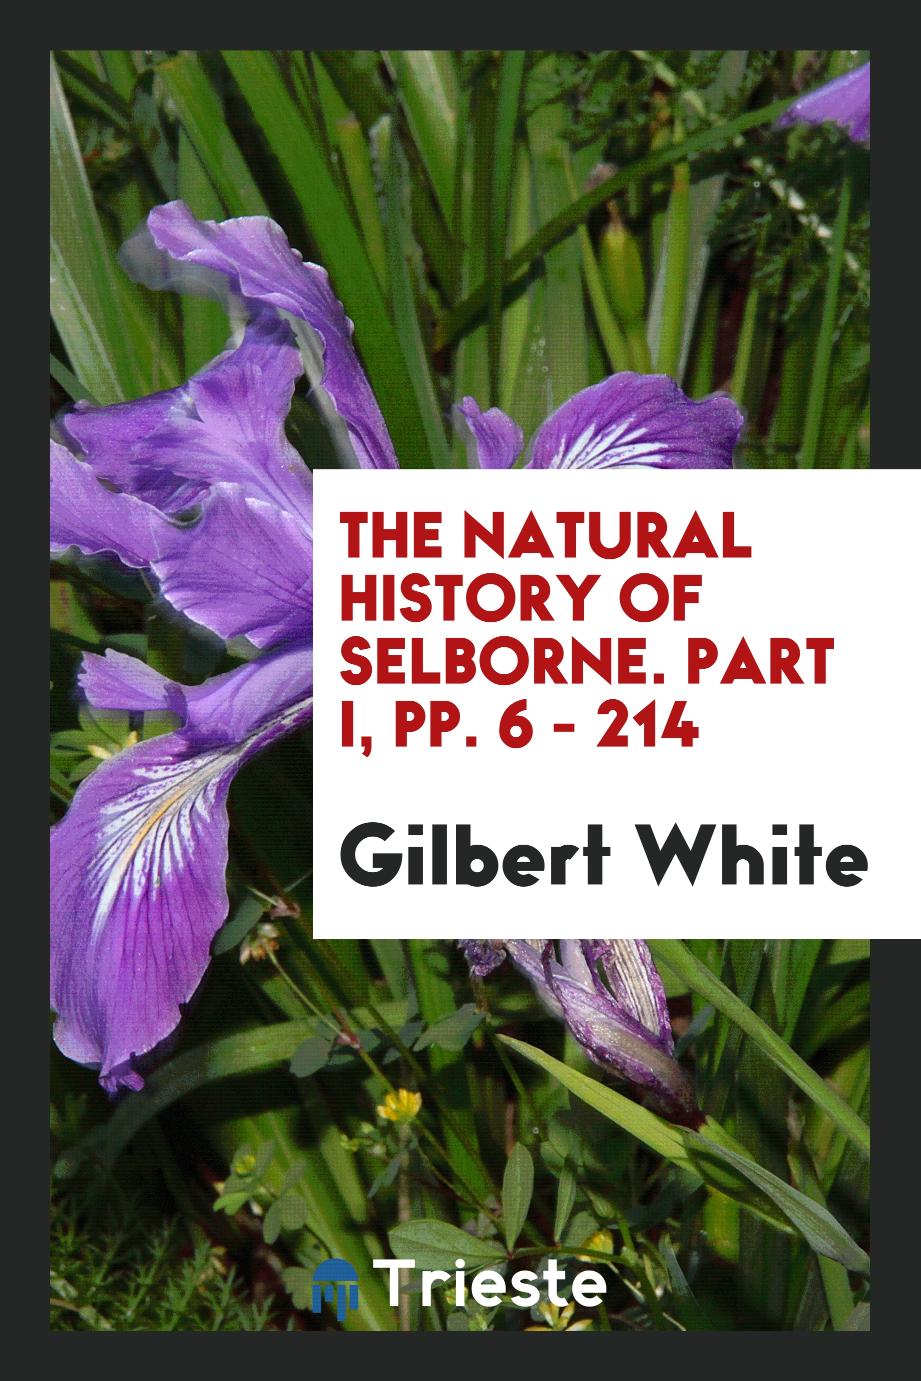 The Natural History of Selborne. Part I, pp. 6 - 214